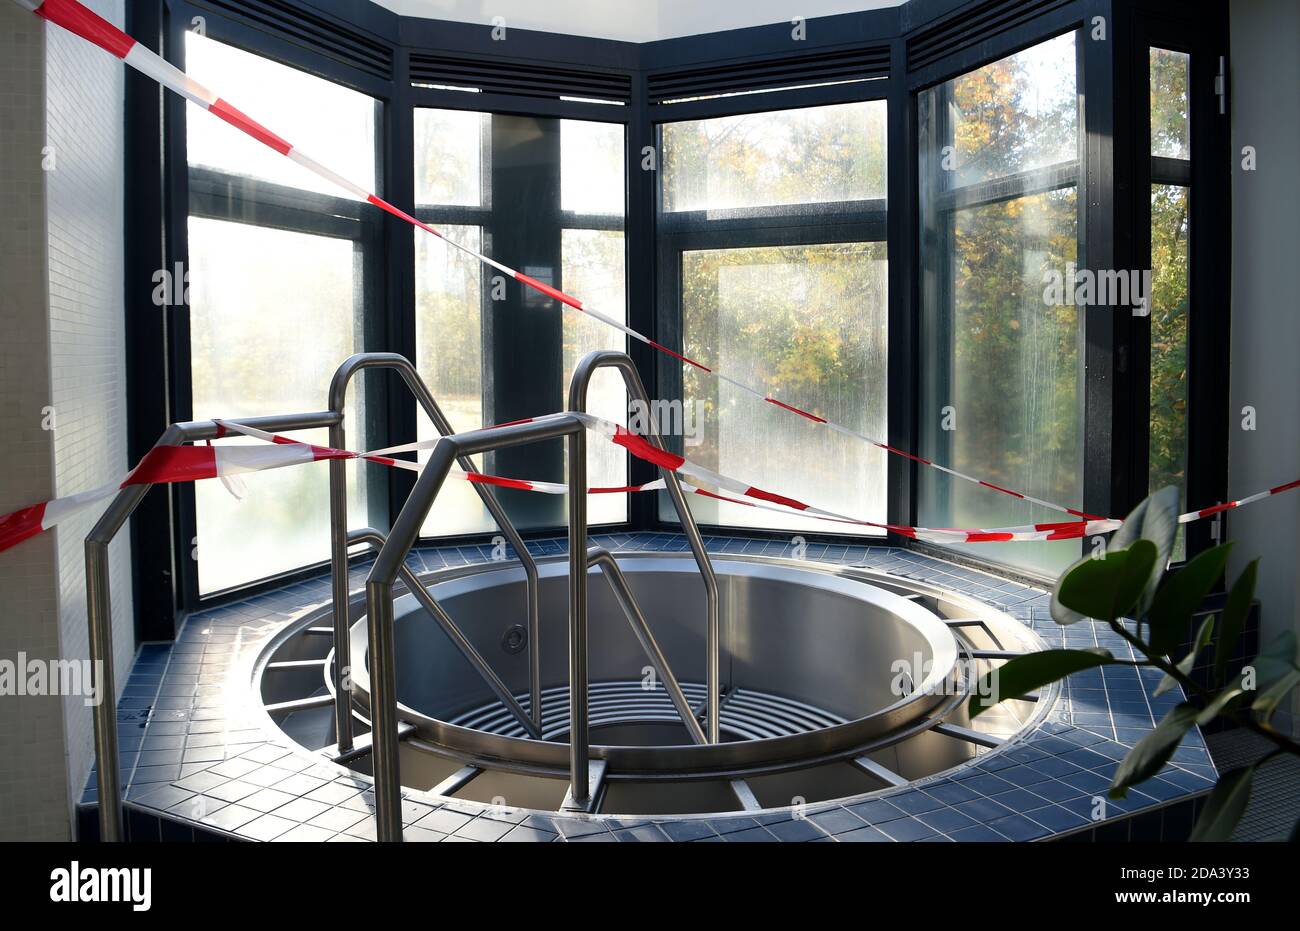 Berlin, Germany. 05th Nov, 2020. Locked whirlpool in the city pool Lankwitz. The swimming pools are closed due to the lockdown. Credit: Kira Hofmann/dpa-Zentralbild/ZB/dpa/Alamy Live News Stock Photo